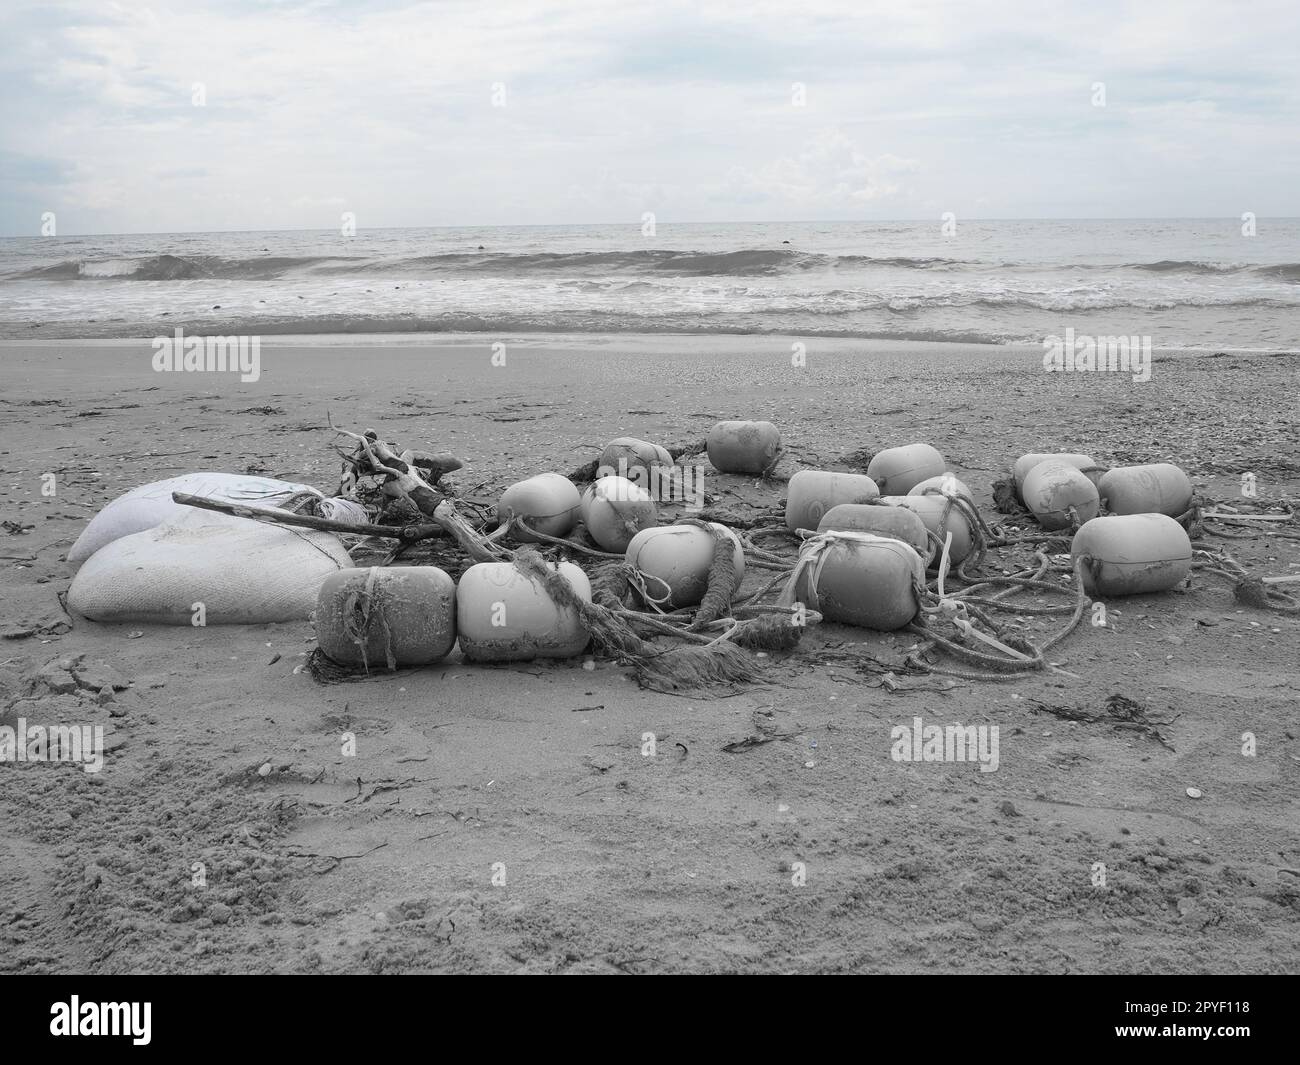 Buoys in the sand. A beach with wet coarse quartz sand. Tangled ropes and plastic buoys left on the shore. Safety equipment. The end of the summer season. Stormy weather at sea or ocean. Low tide. Stock Photo